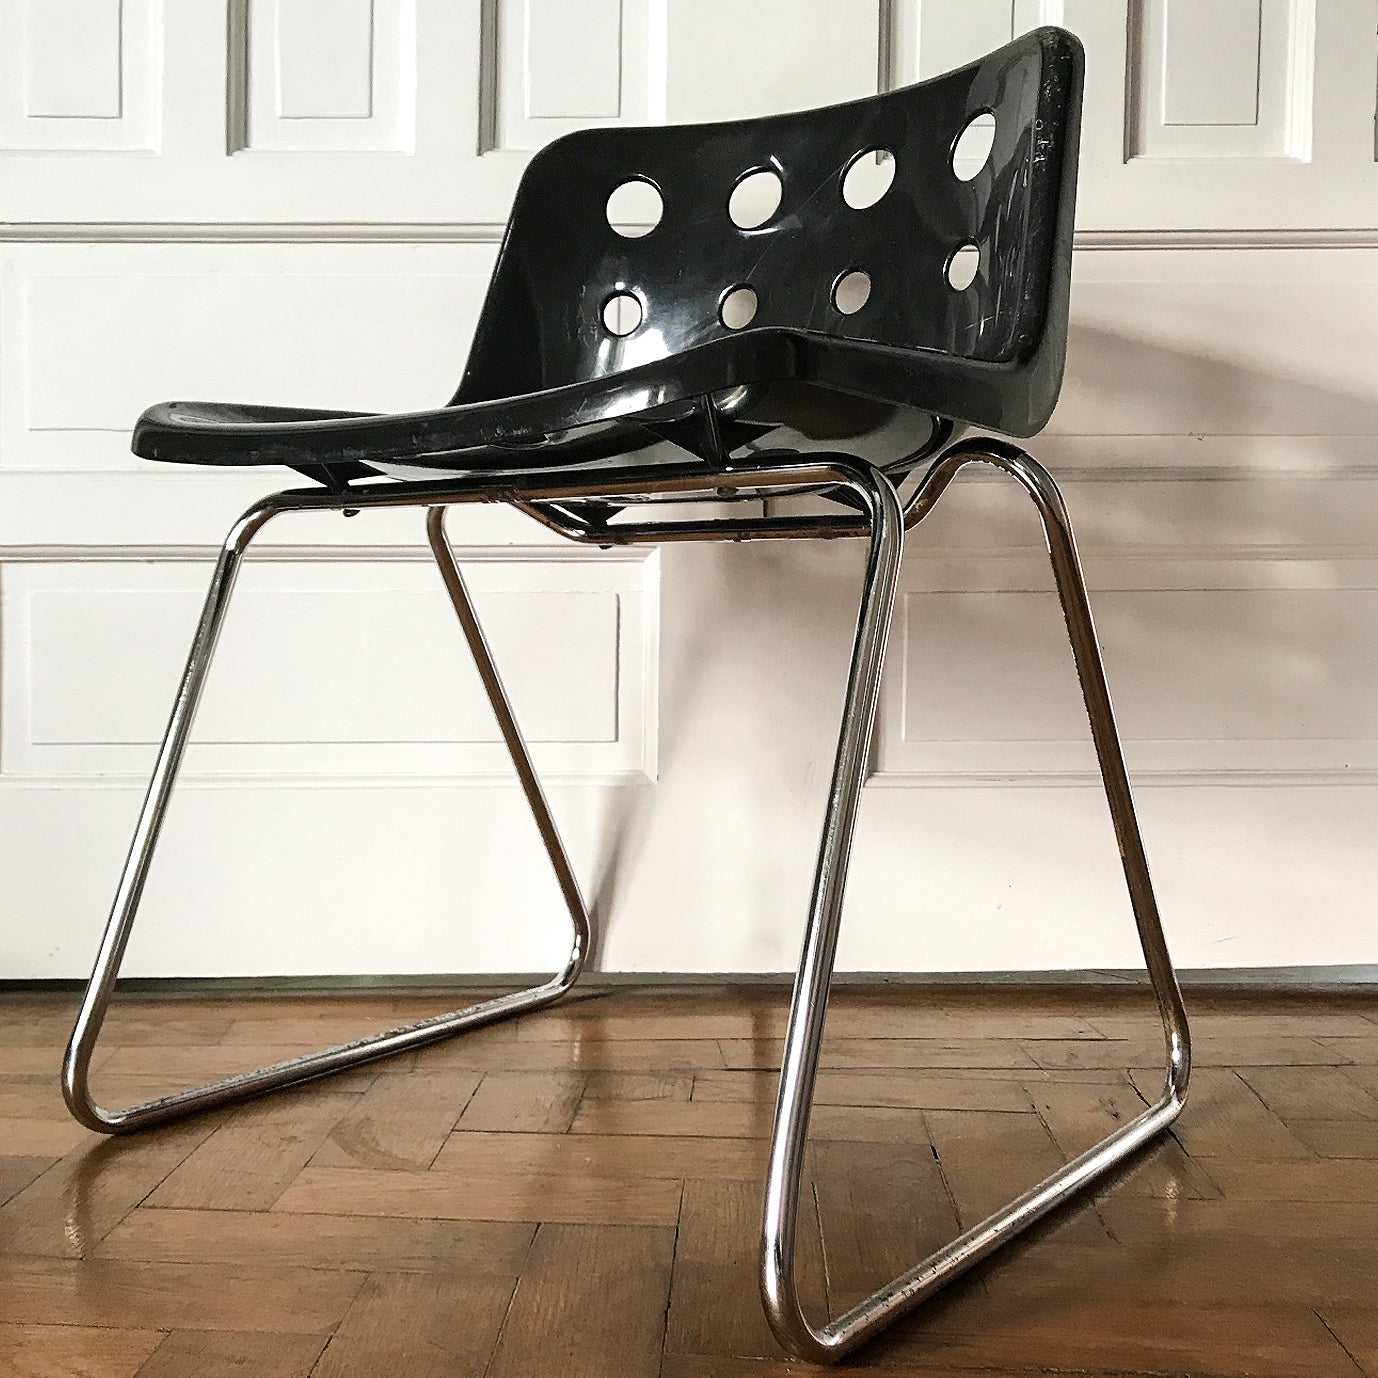 Original Robin Day for Hille of London ‘Polo’ chair designed in 1975 with chromed steel rod skid base and pierced polypropylene shell-black seat - SHOP NOW - www.intovintage.co.uk